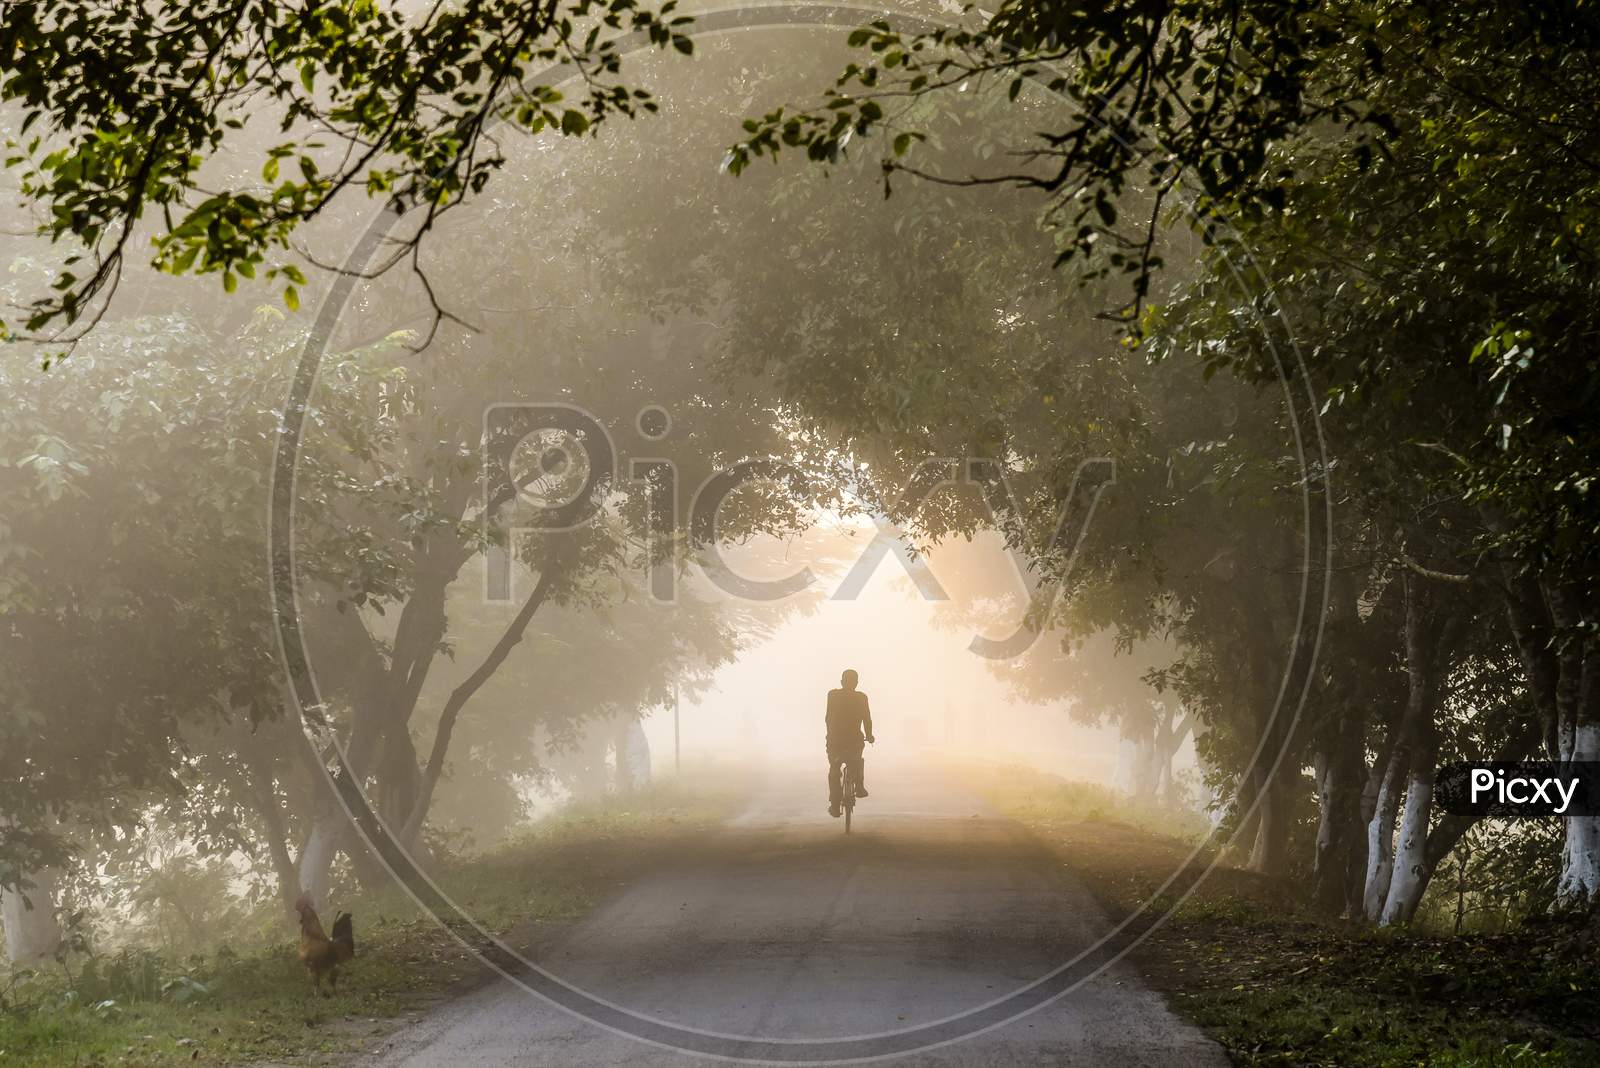 A Forest Guard Cycling In A Foggy Morning Towards Kaziranga National Park, In Golaghat District Of Assam In India, On 12 November 2019.